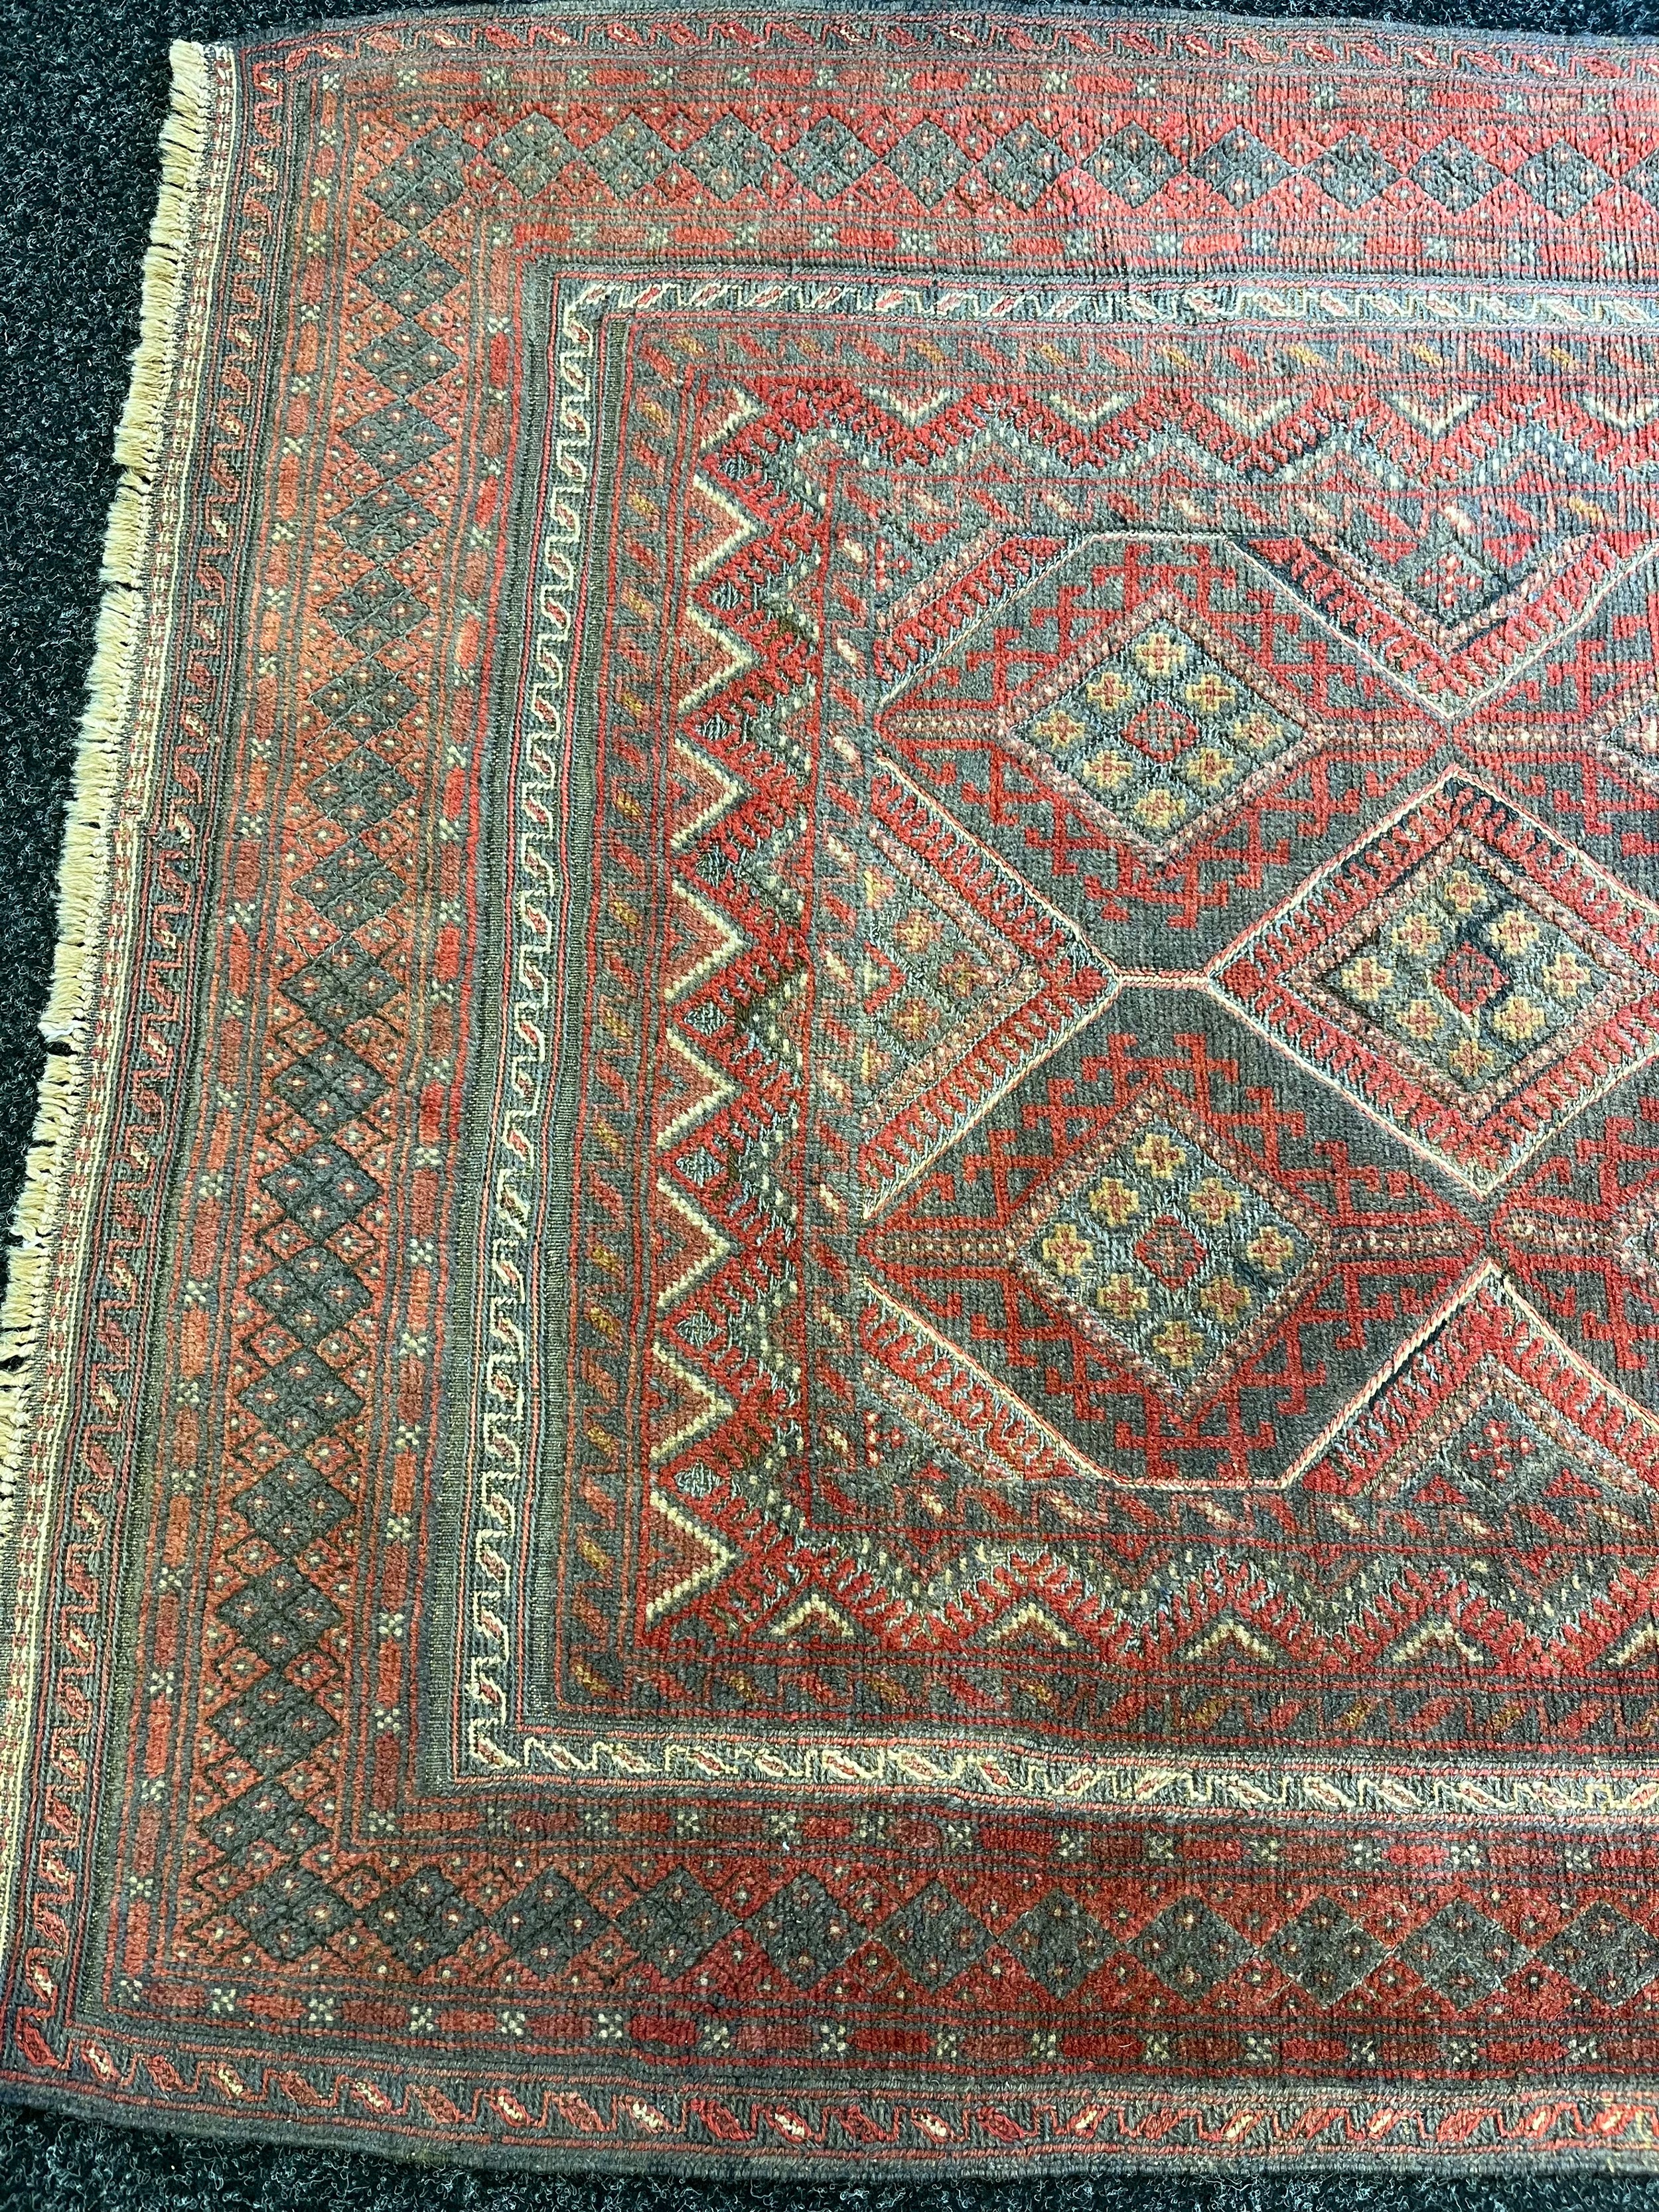 Antique handmade kilm rug, comes with certificate of authenticity [194x121cm] - Image 5 of 7